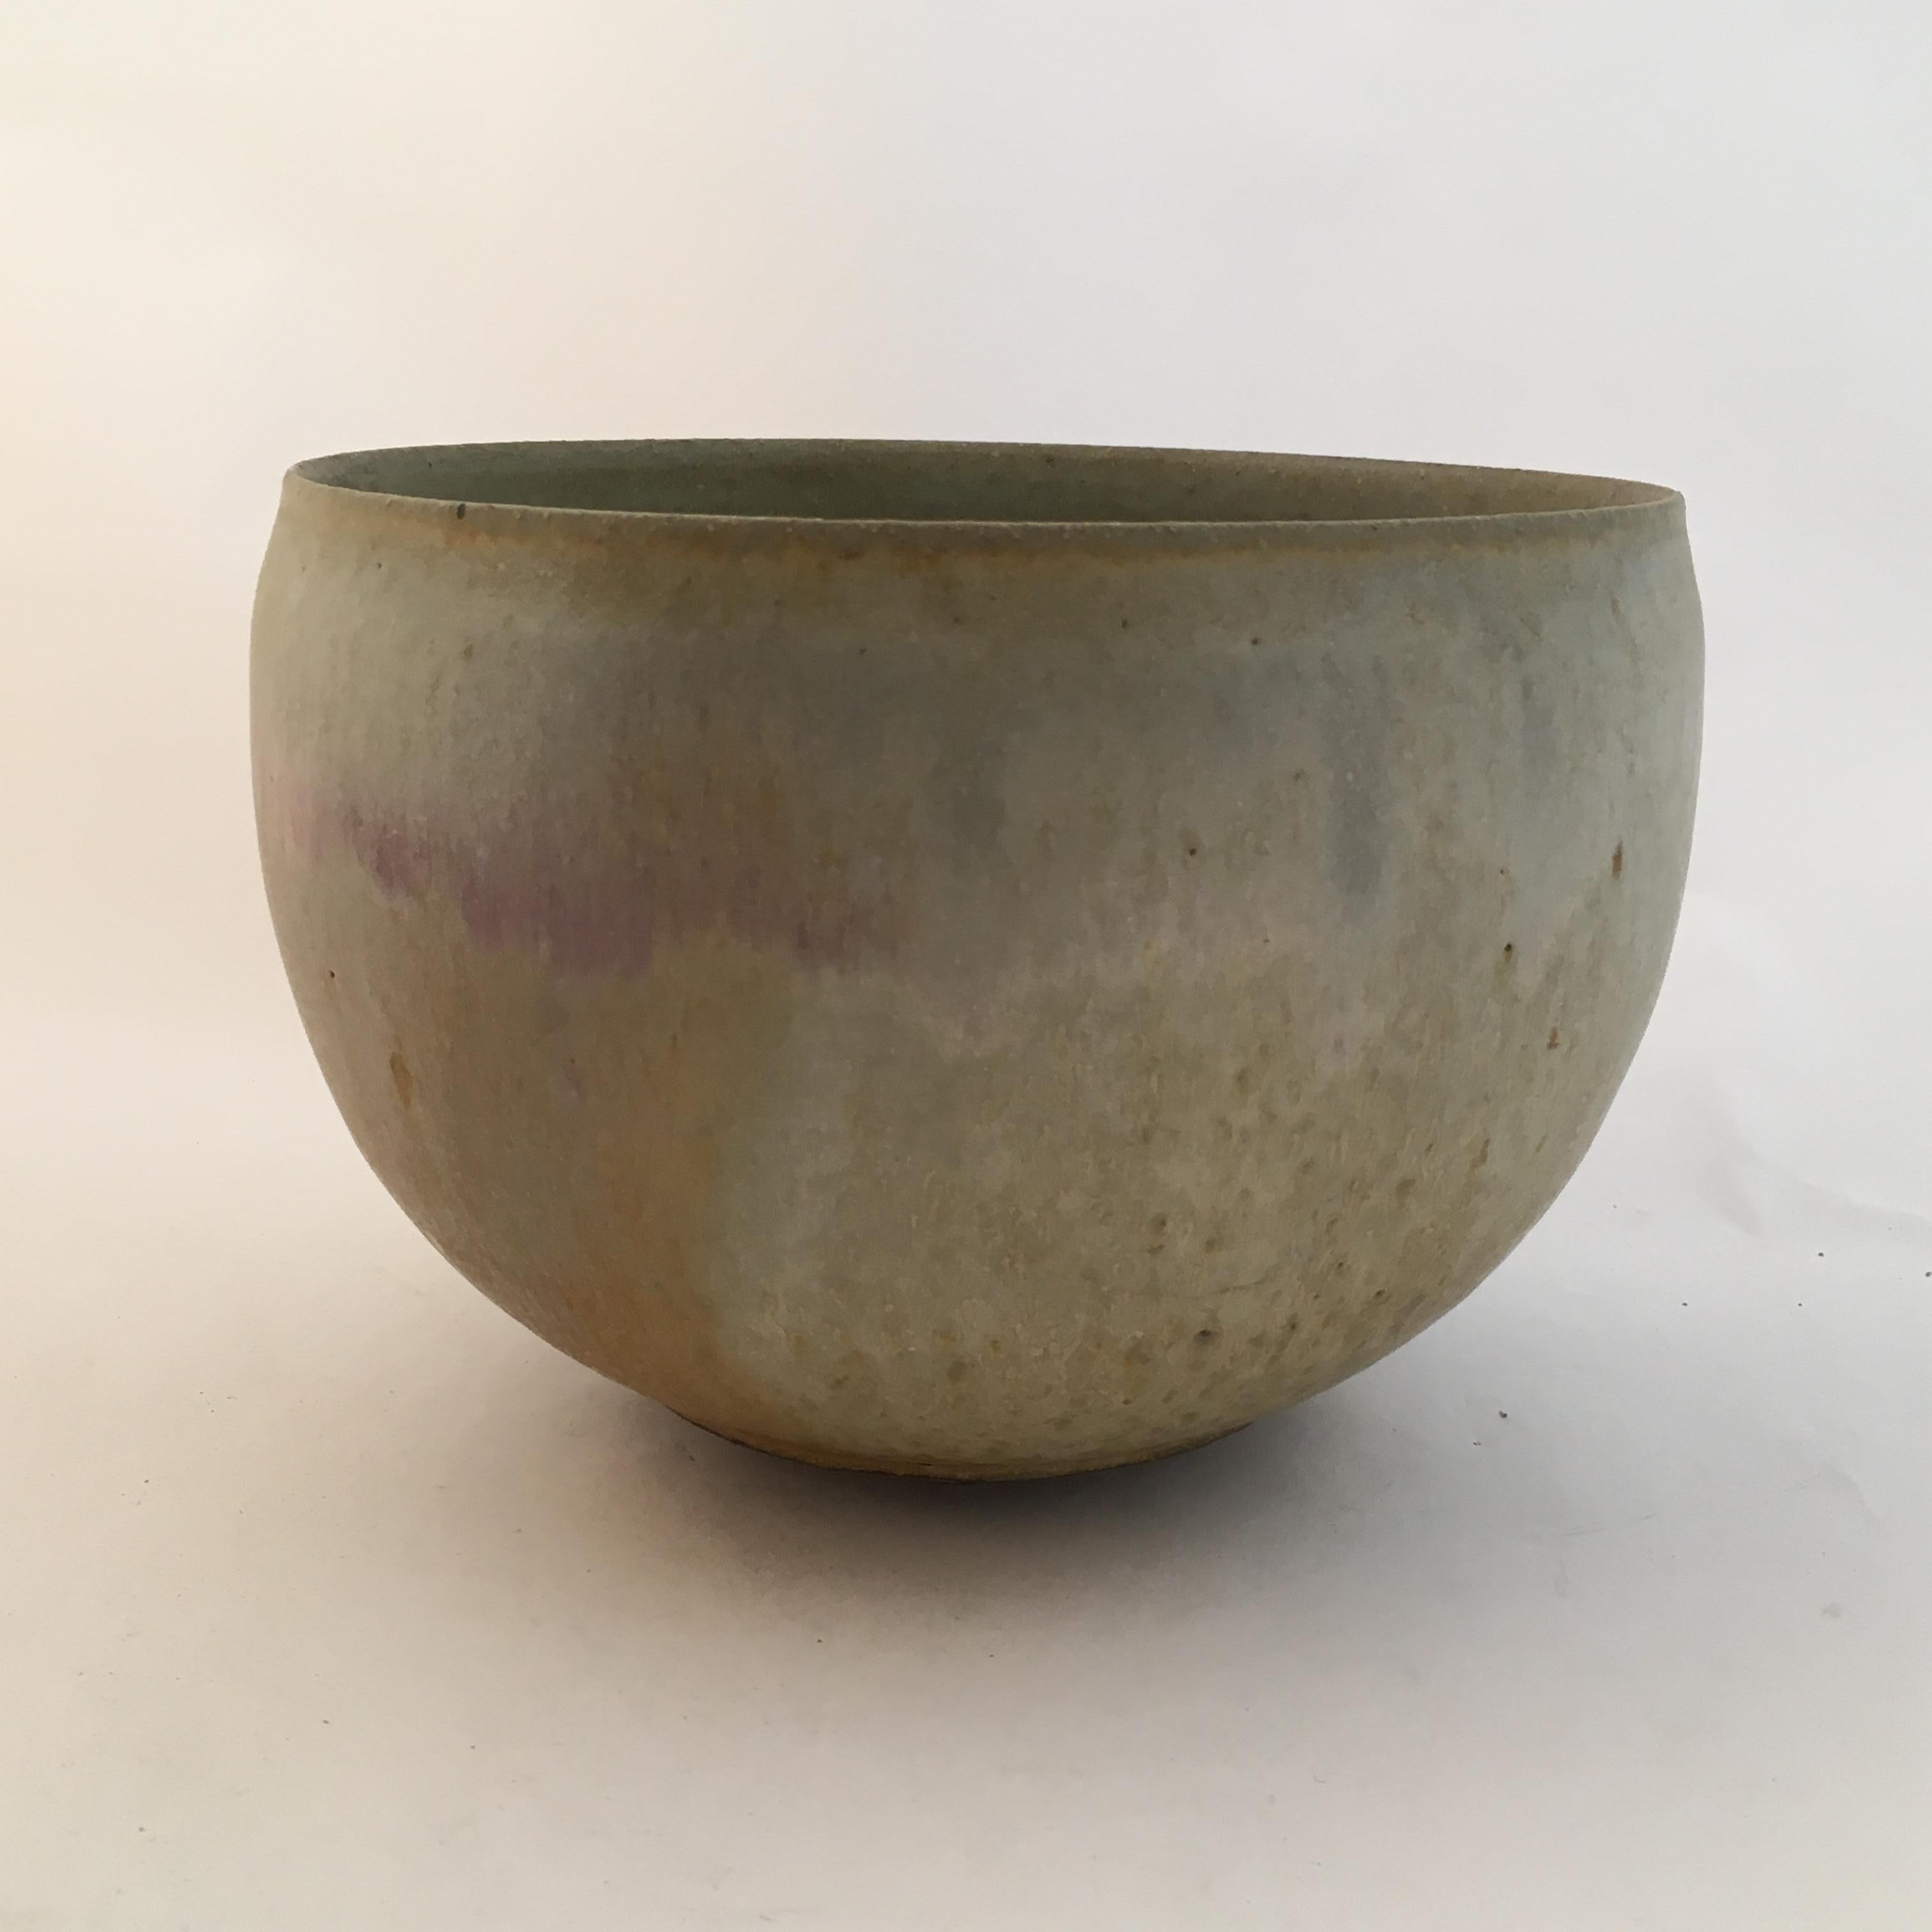 Beautiful Henry Kendall Gernhardt stoneware Studio Pottery bowl, circa 1970. Signed with impressed signature. Excellent condition; no chips, cracks, crazing, hairlines or restorations. Exquisitely glazed with a hint of shimmering pink among the